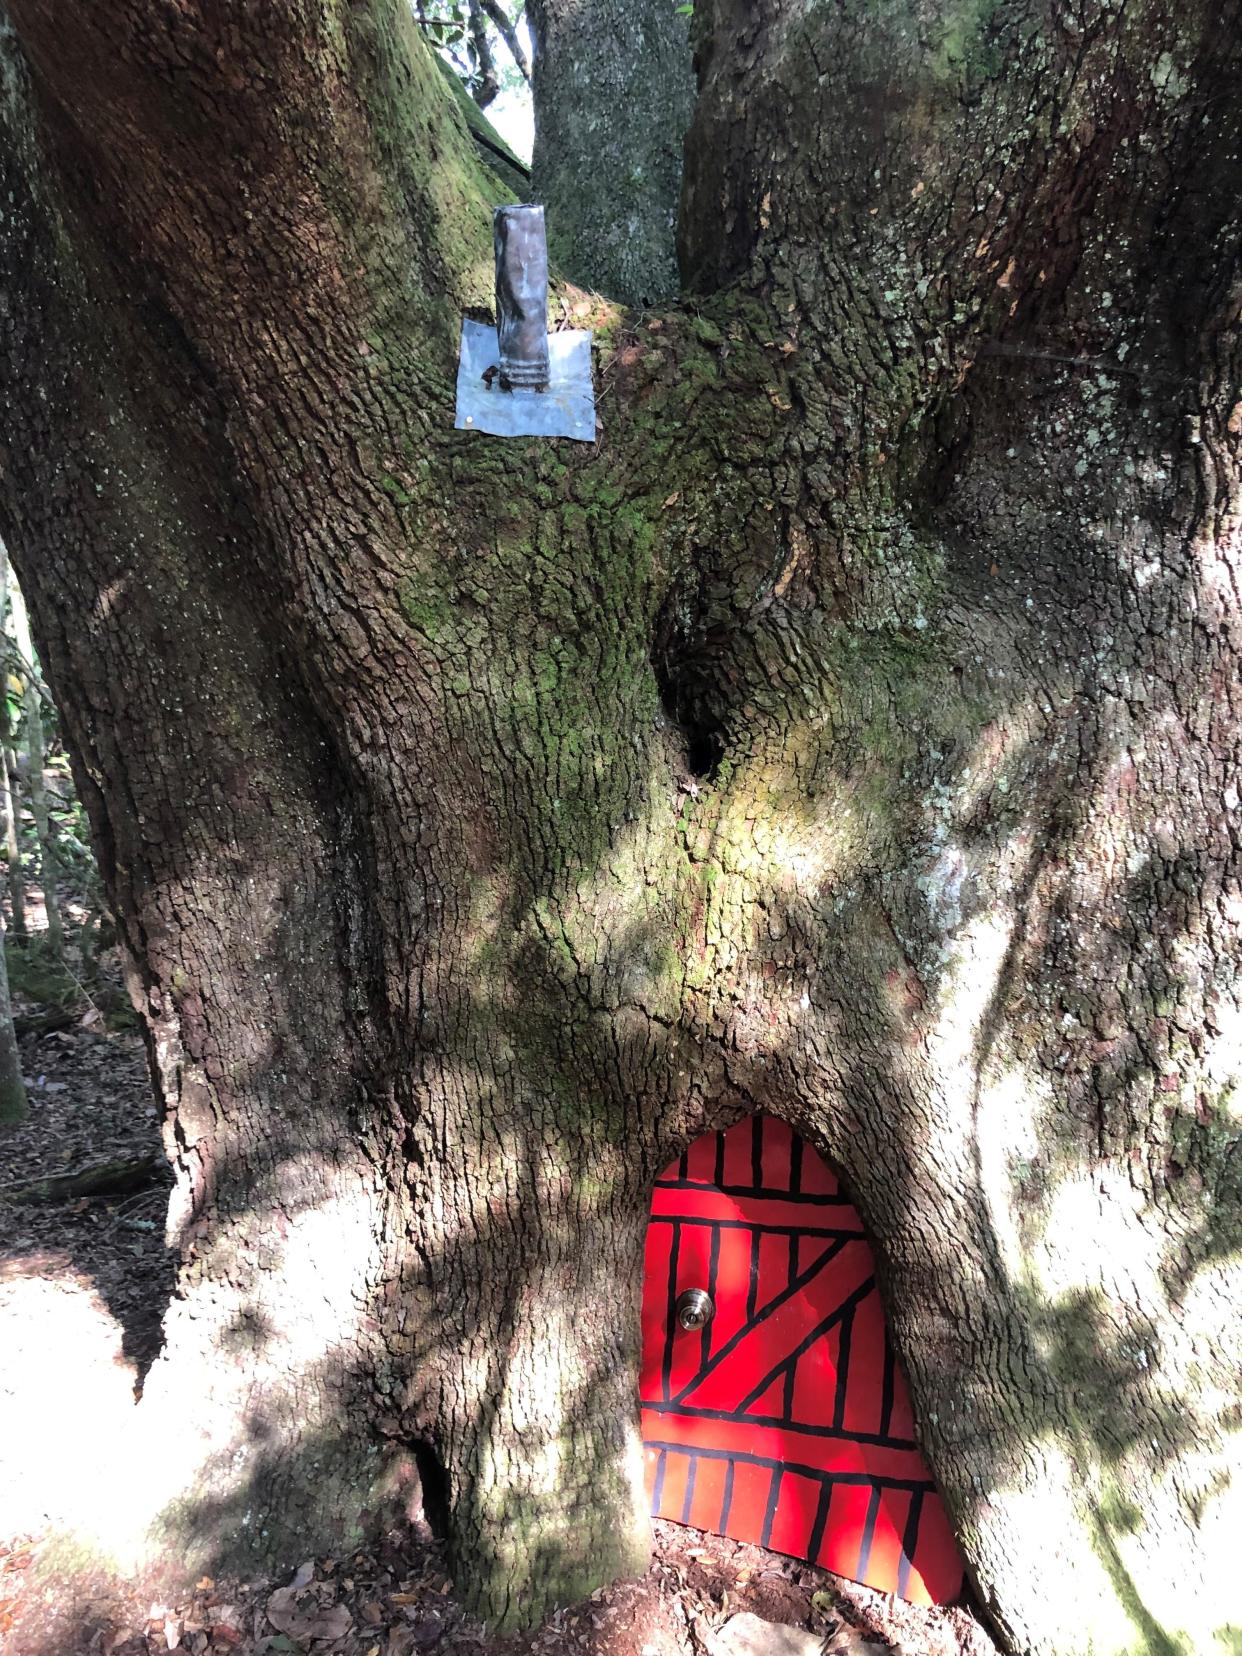 Back in the COVID days of 2021, visitors to Maclay State Park who happened by a massive oak tree along a remote forest trail first noticed a small red door hung on the ancient tree’s trunk.